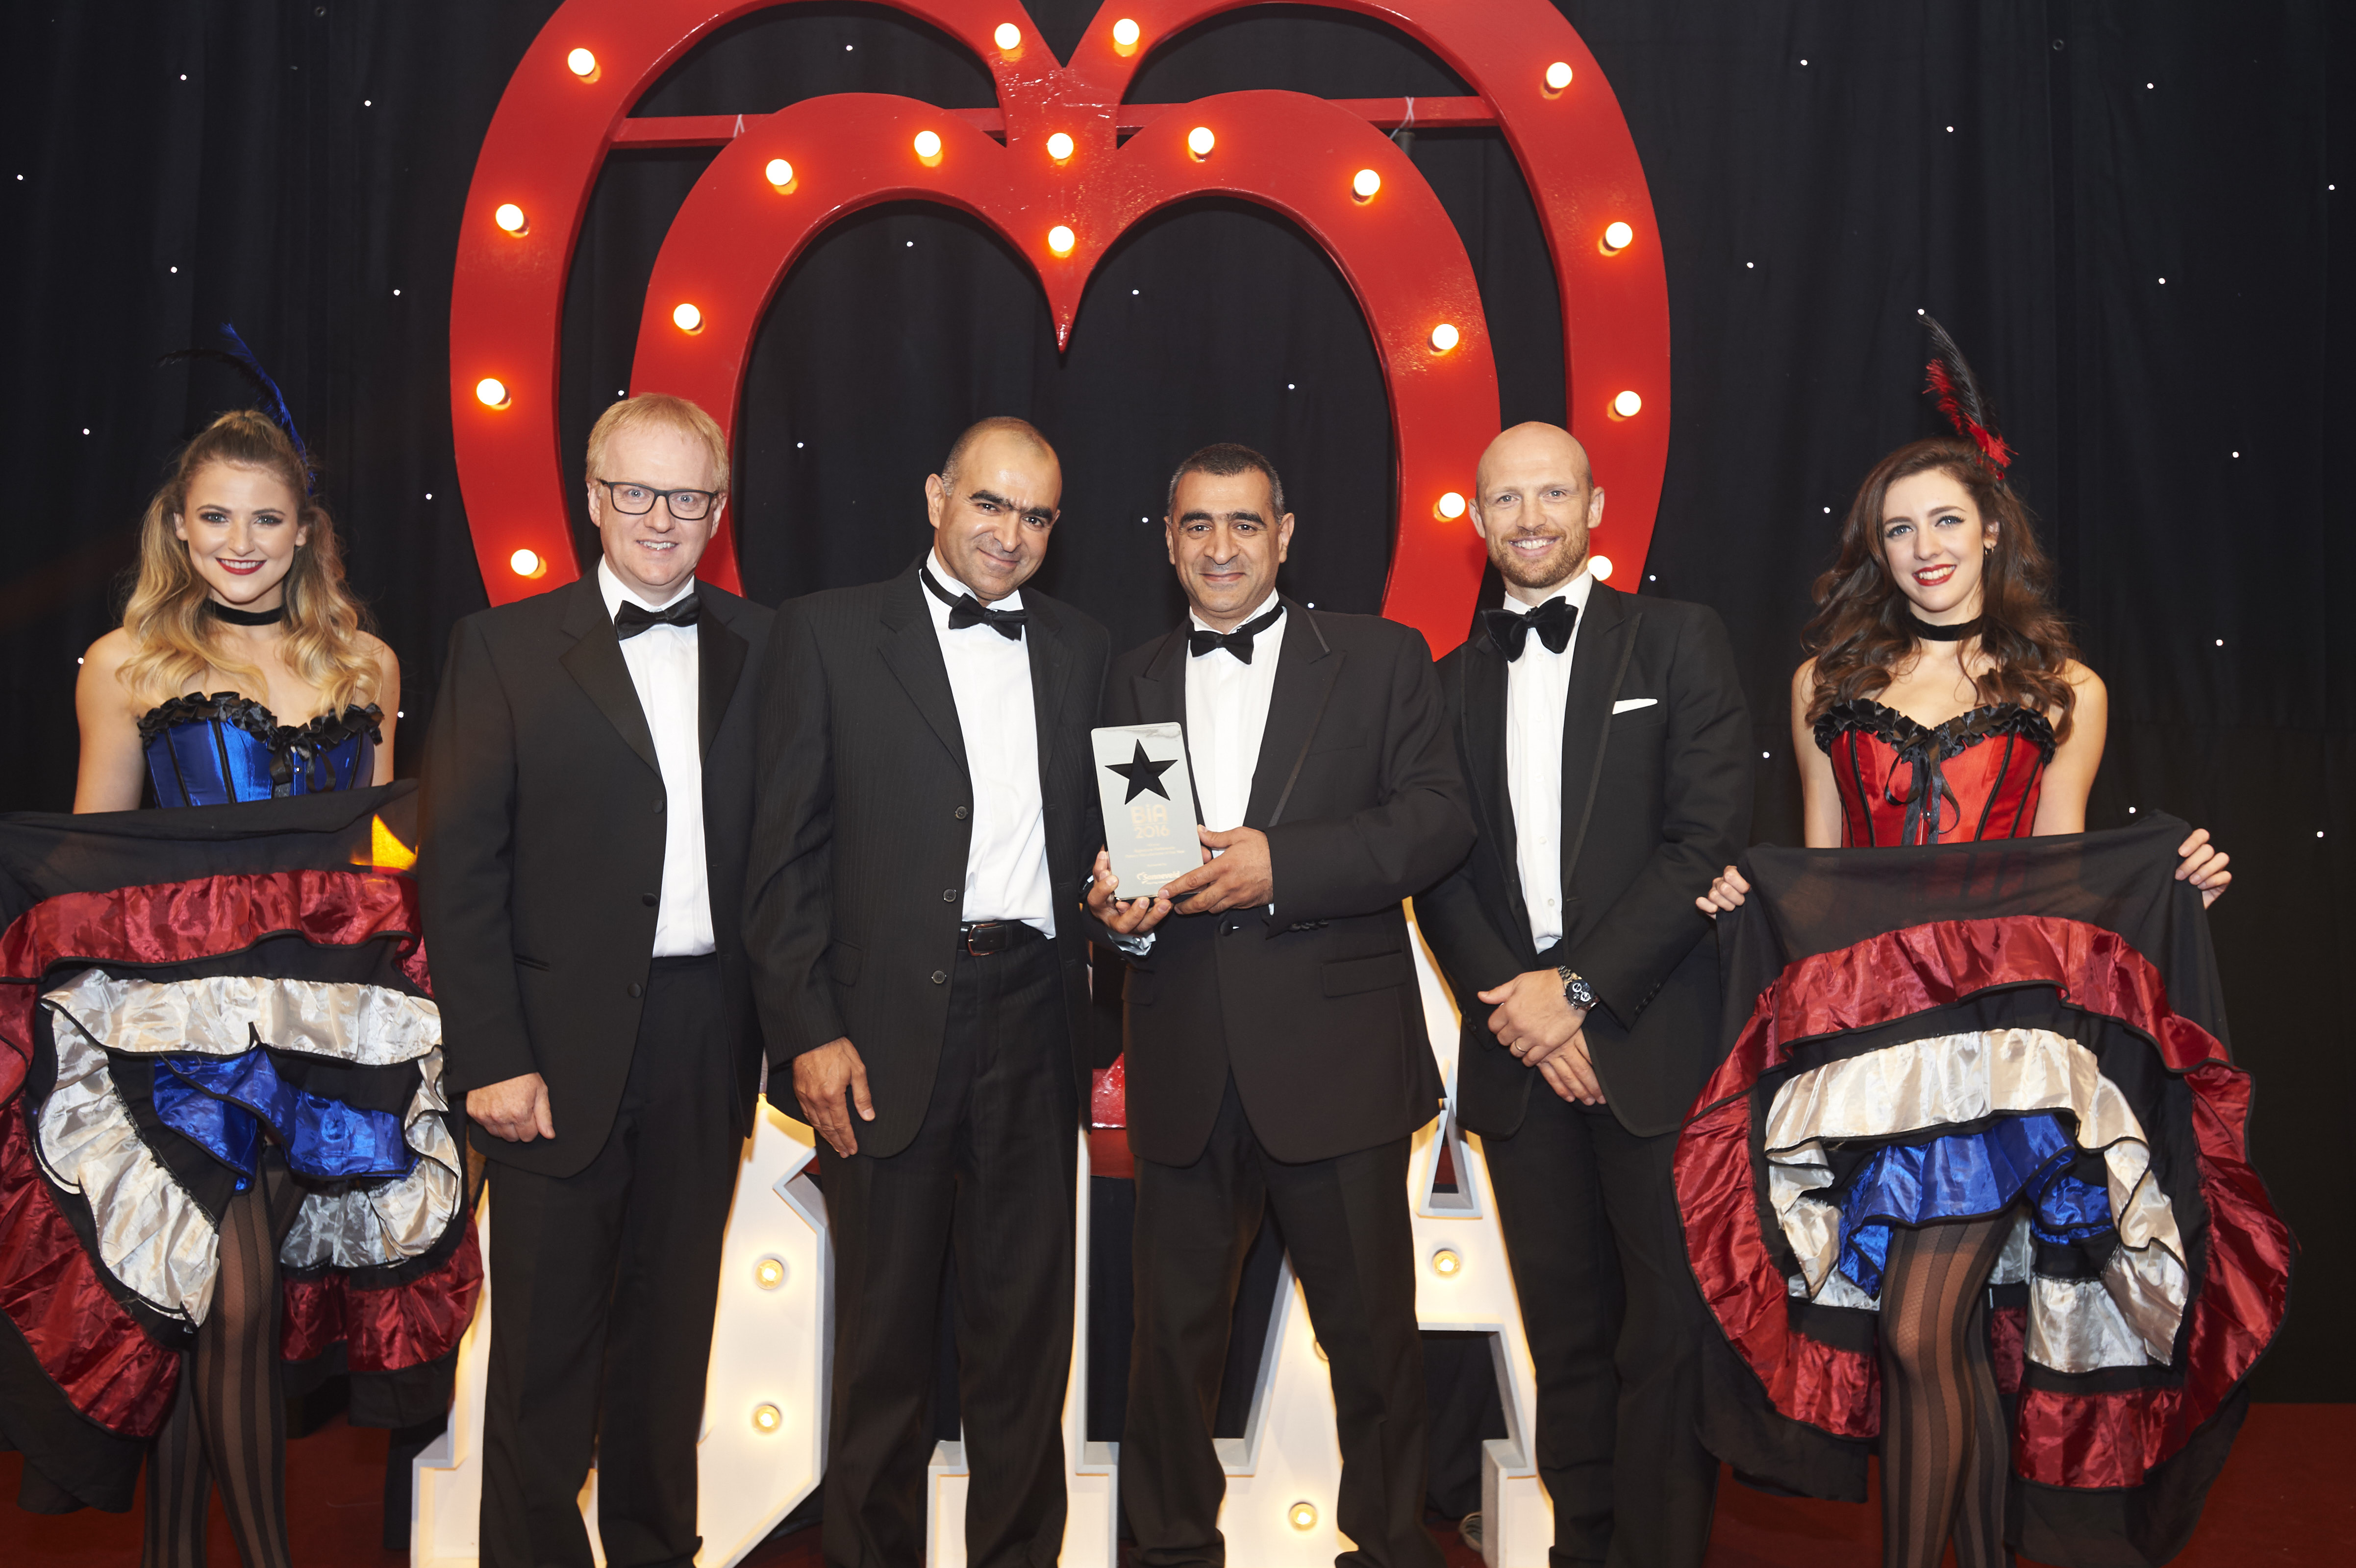 Signature Flatbreads wins Bakery Manufacturer of the Year